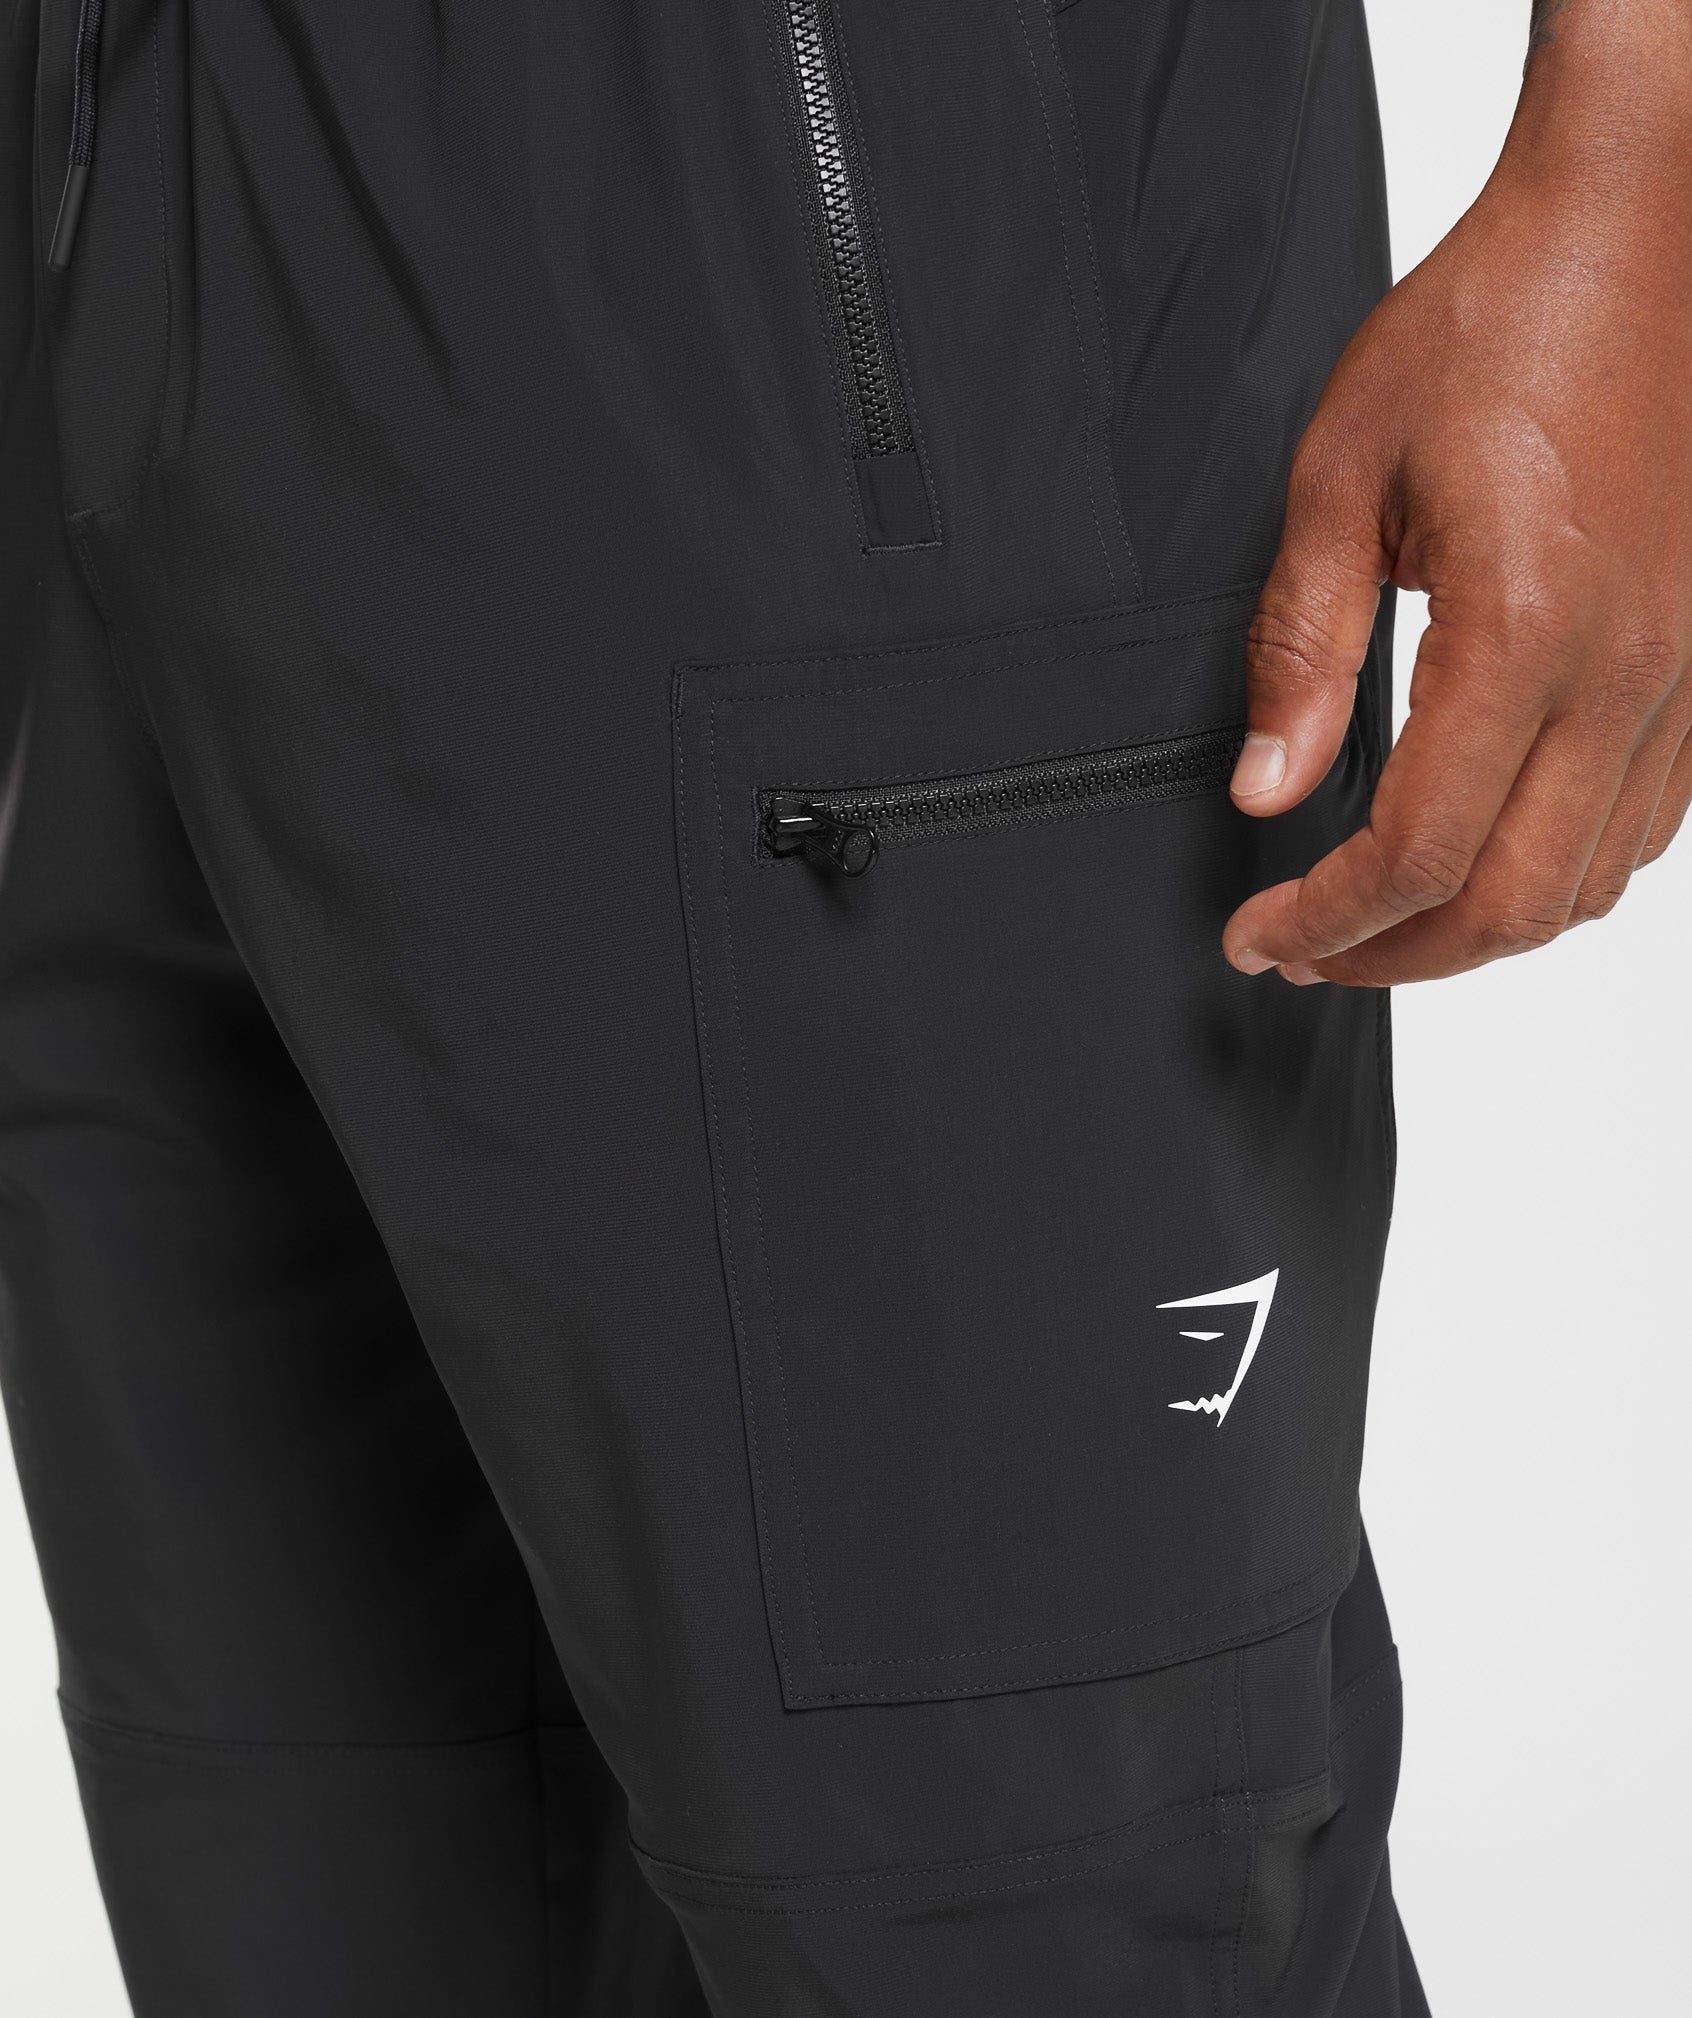 Rest Day Cargo Pants in Black - view 5